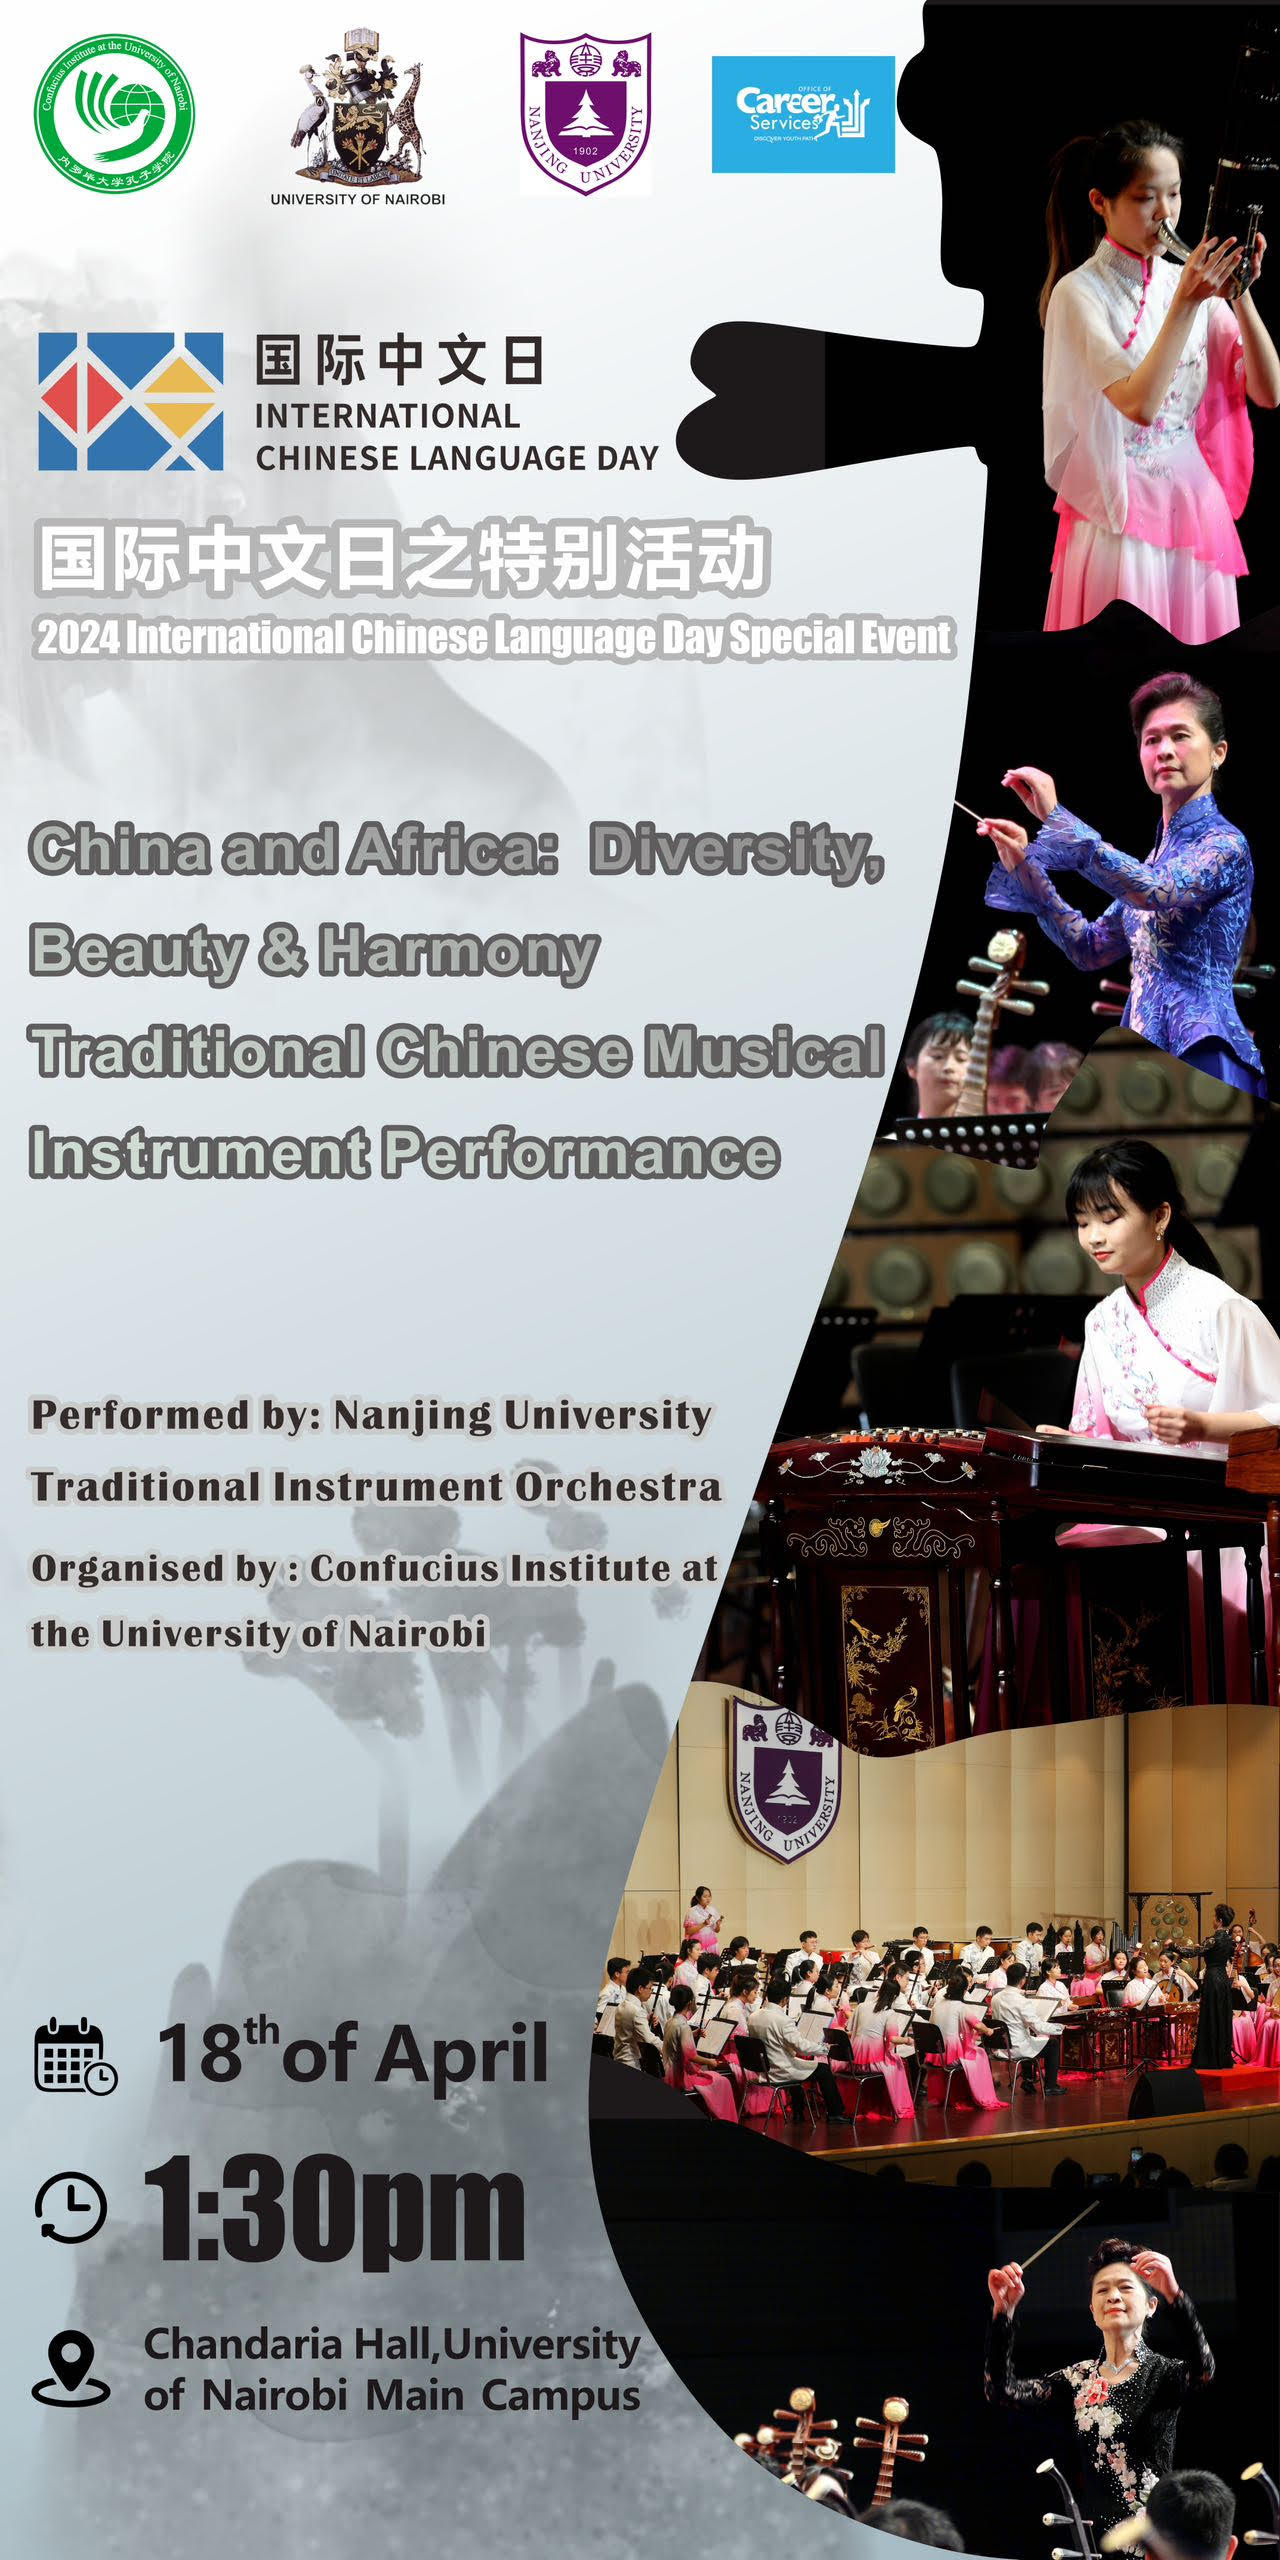 Invitation to Traditional Chinese Musical Instrument Performance